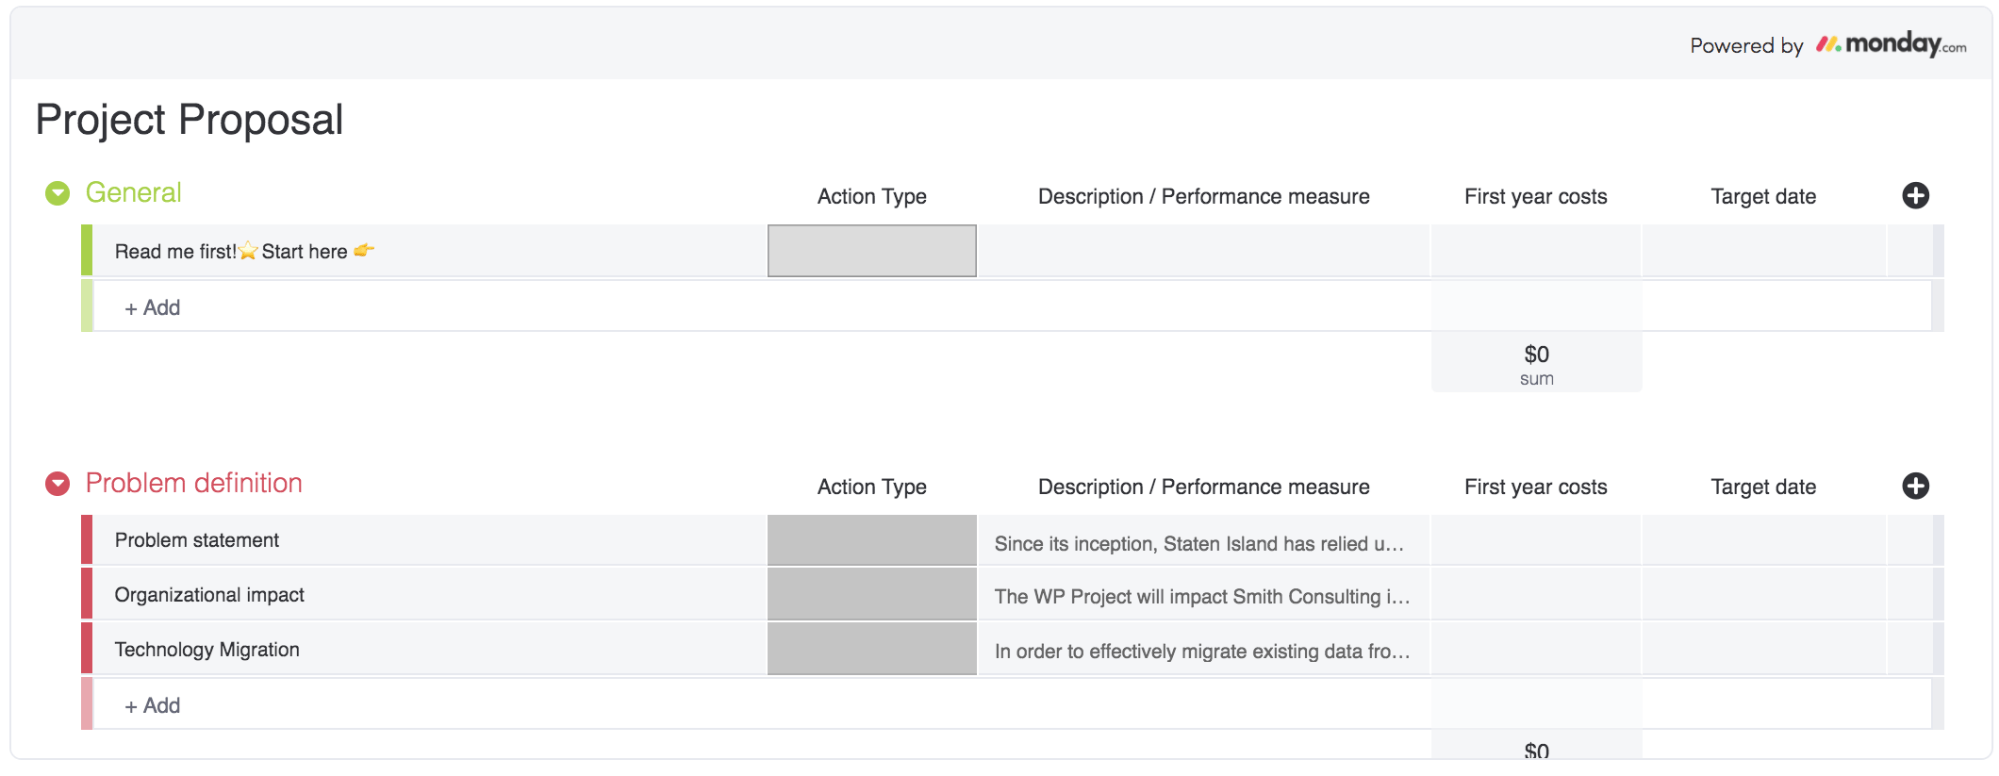 Project Proposal template from monday.com